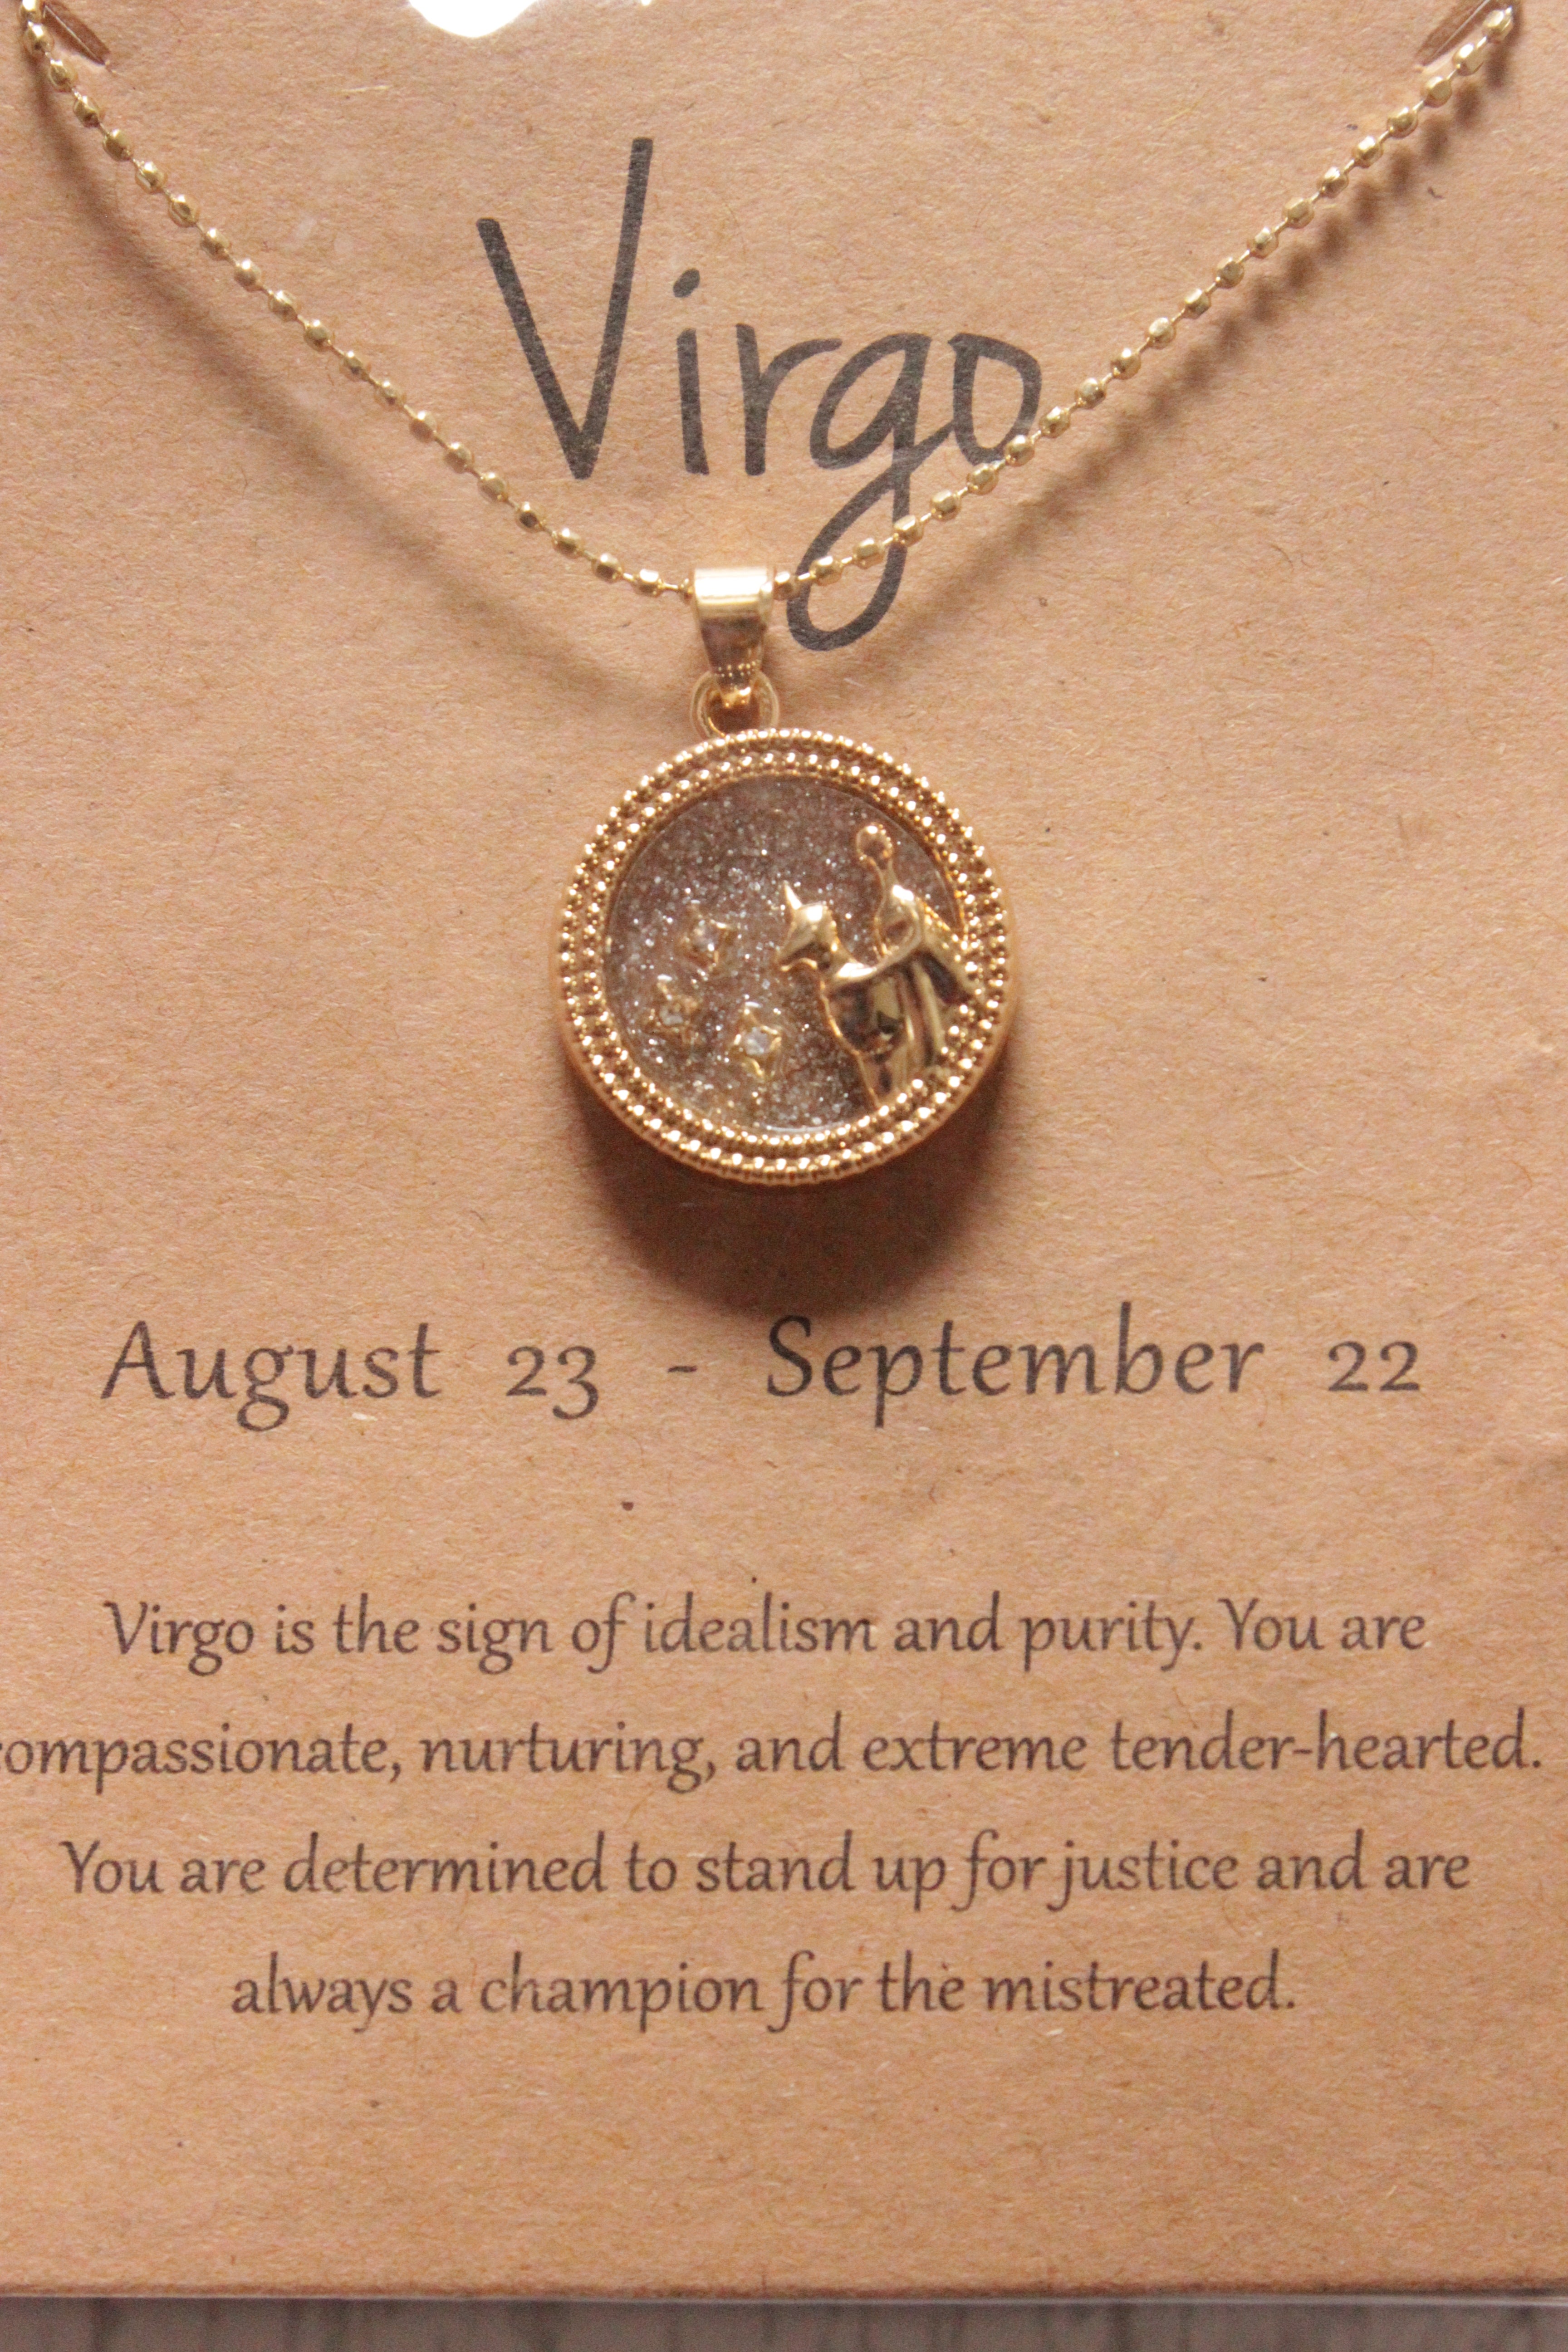 Virgo Sun Sign Gold Plated Day Style Round Resin Horoscope Astrology Minimalist Pendant Necklace with Card